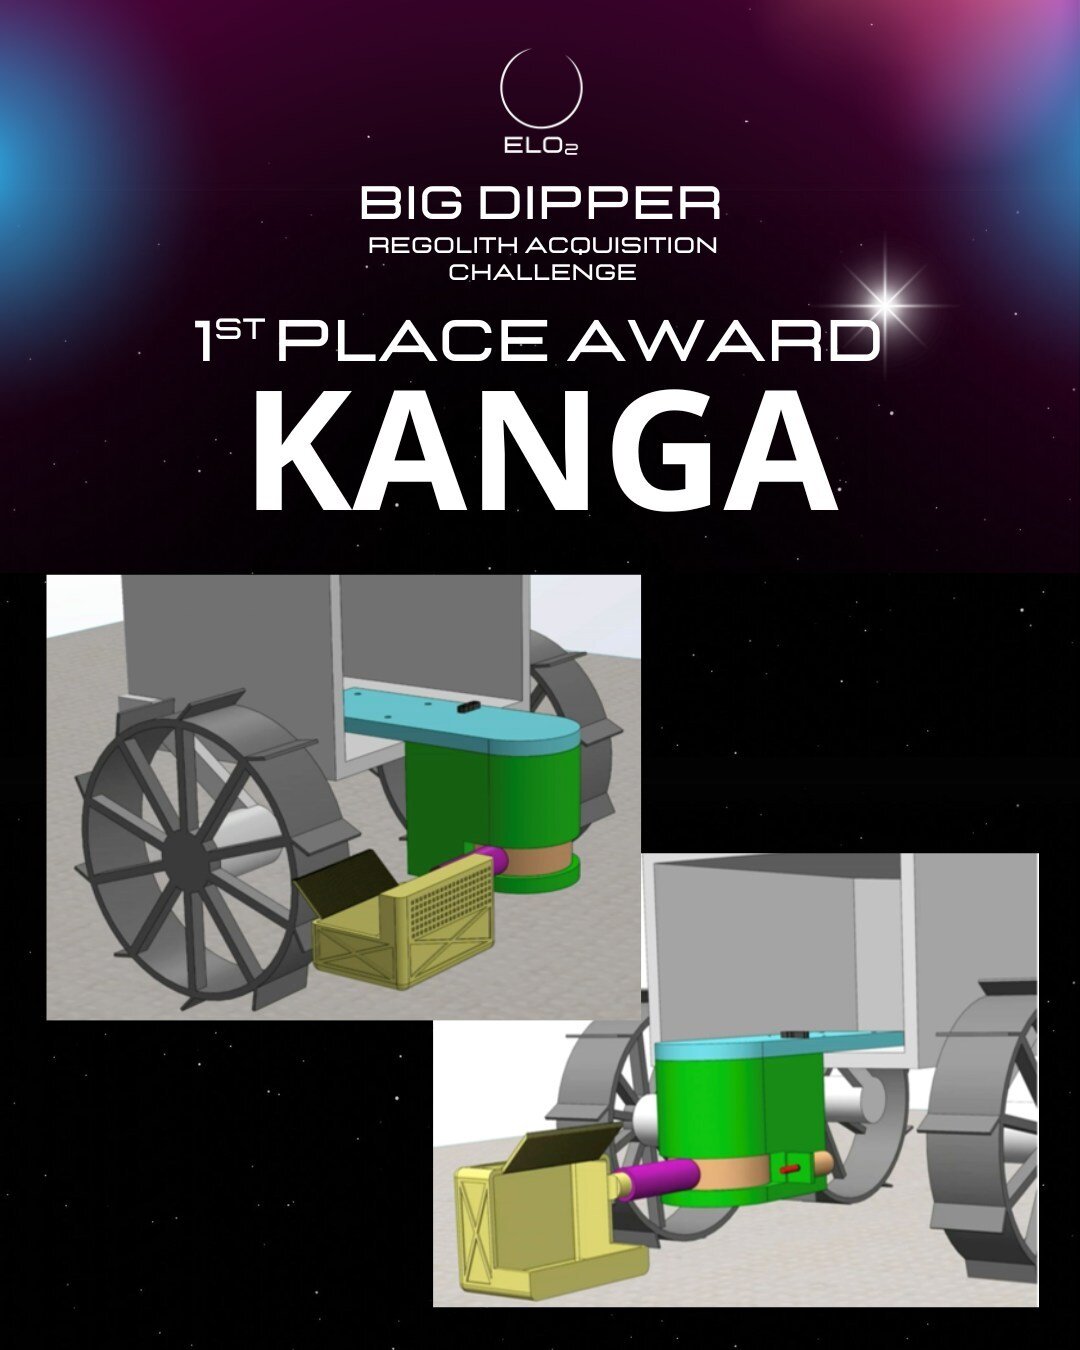 Congratulations to one of three @elo2.au Big Dipper Challenge 1st Place Winners &ndash; KANGA! ⁠
⁠
Winning designs were judged on creativity, functionality, durability, scalability, and evidence of design optimisation. The Kompact Articulation with N